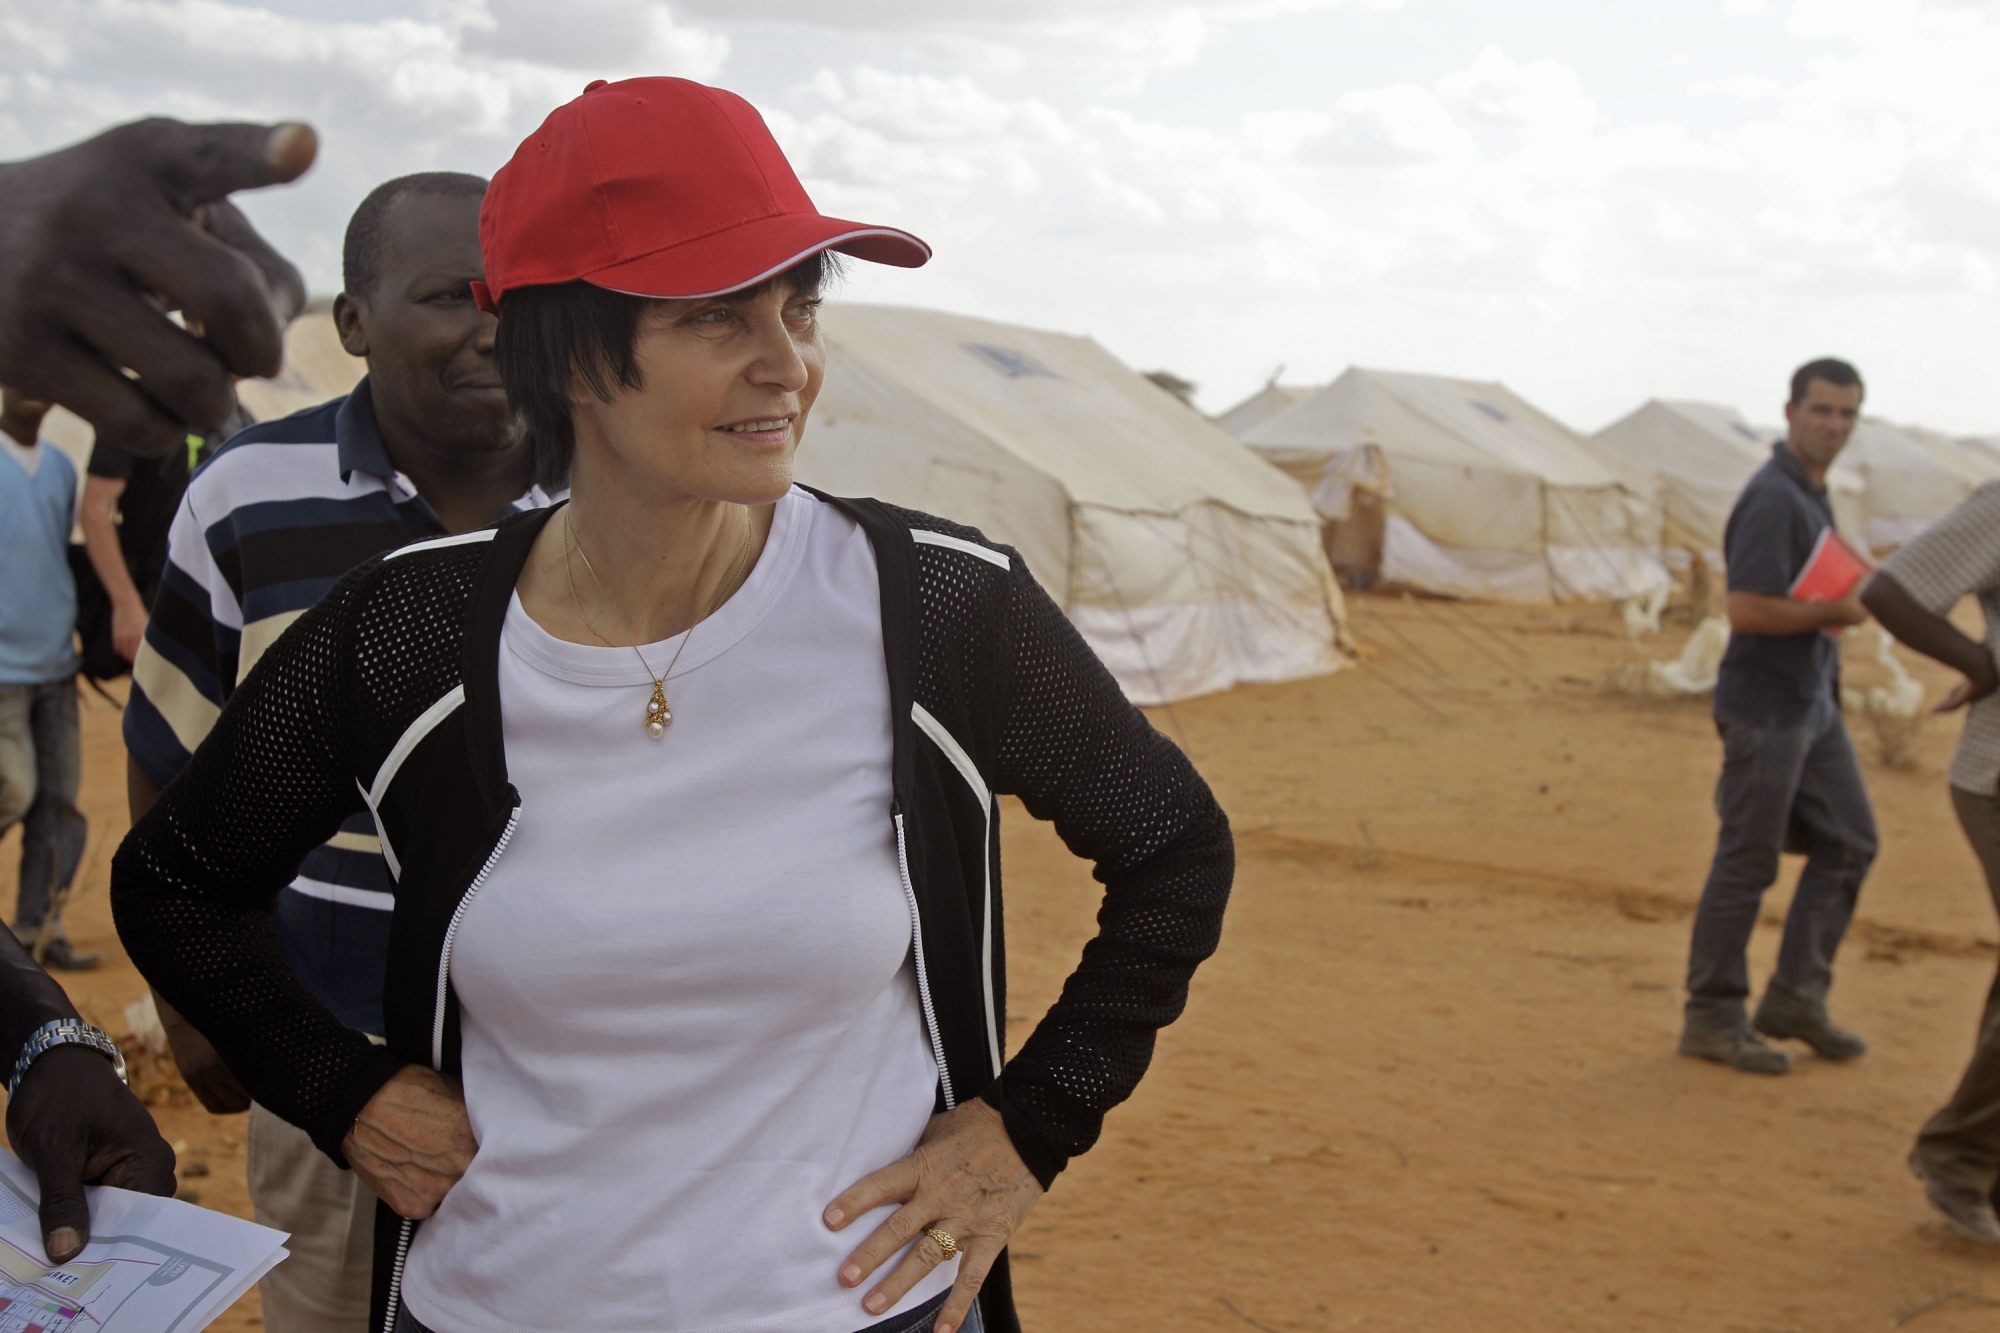 Swiss President Micheline Calmy-Rey looks at a refugee camp in Dadaab, Kenya, Wednesday, Aug 3, 2011. Swiss President Micheline Calmy-Rey was on a one day visit to Dadaab, a camp designed for 90,000 people now houses around 440,000 refugees. Almost all are from war-ravaged Somalia. Some have been here for more than 20 years, when the country first collapsed into anarchy. But now more than 1,000 are arriving daily, fleeing fighting or hunger. (KEYSTONE/AP Photo/Schalk van Zuydam)